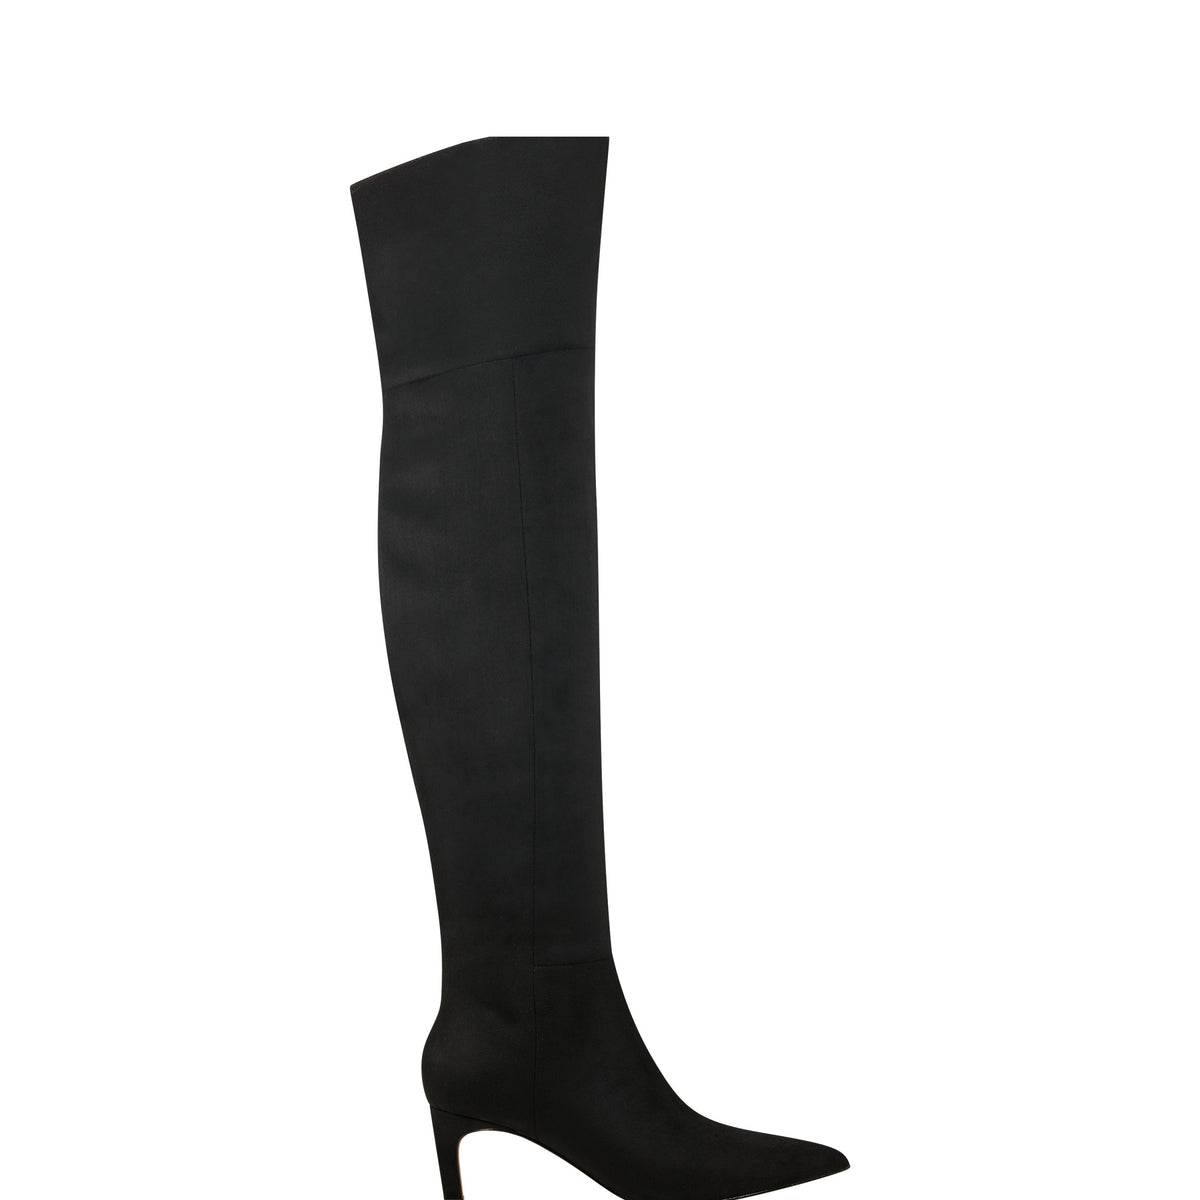 Qulie Pointy Toe Over The Knee Dress Boot